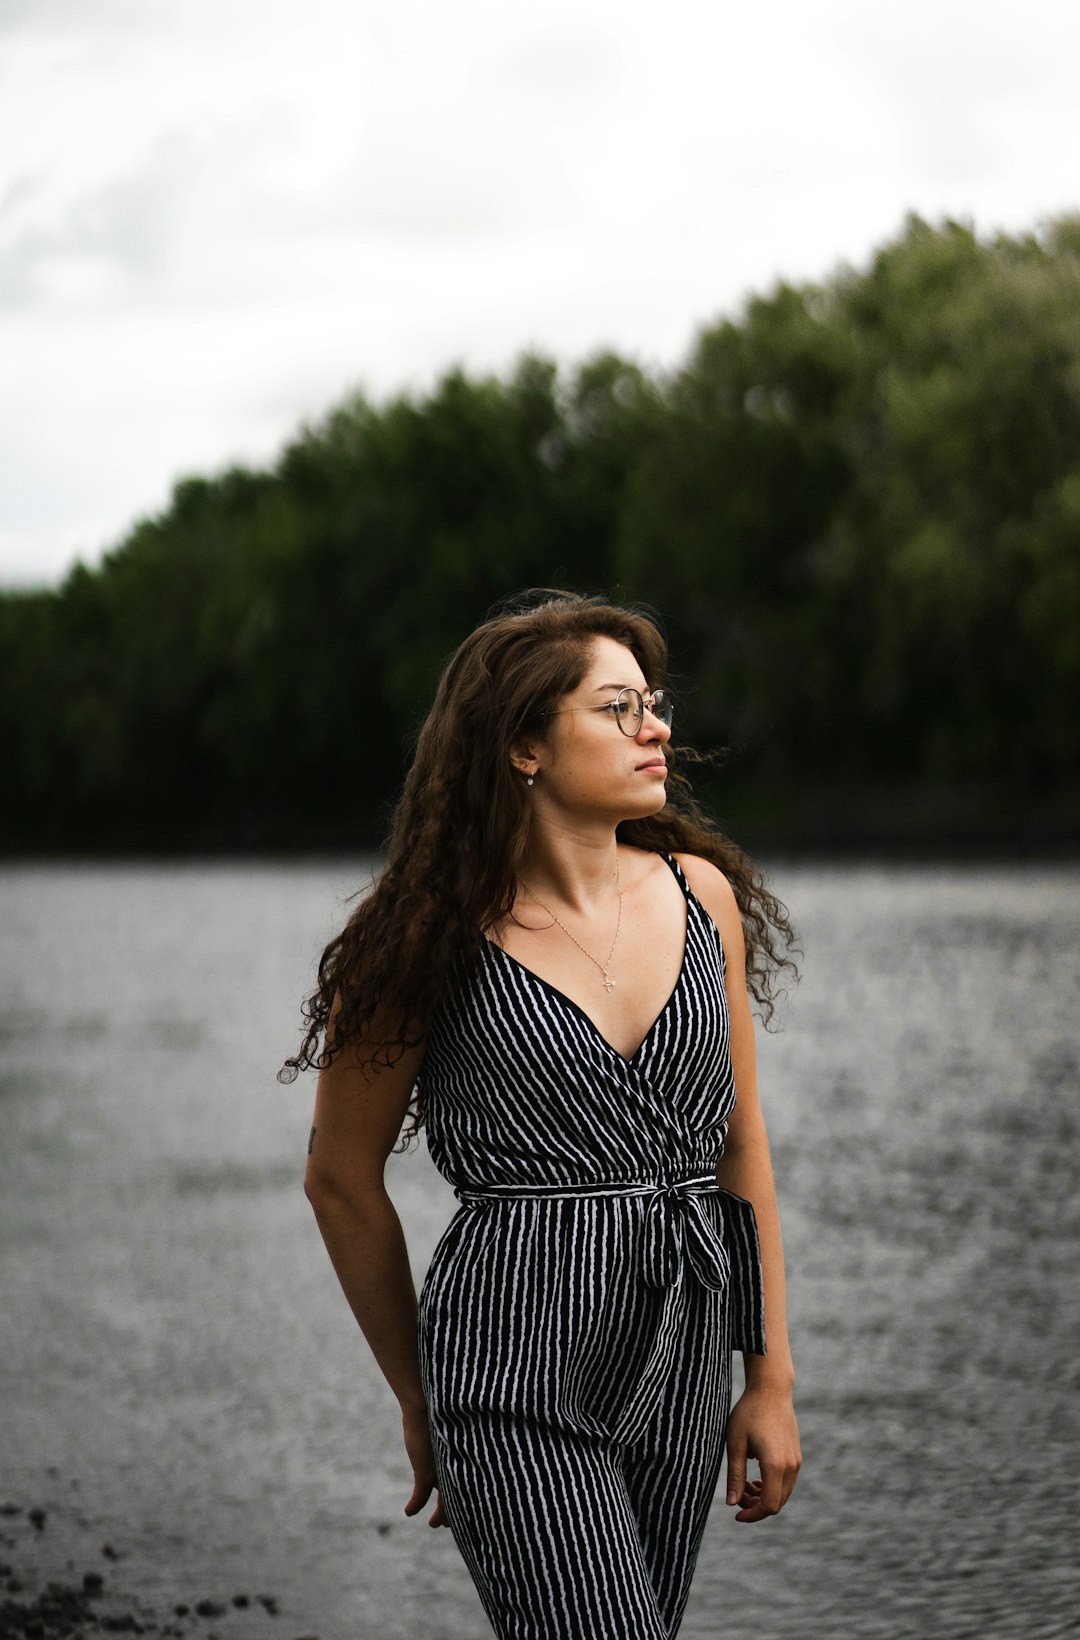 woman in black and white stripe dress standing near body of water during daytime